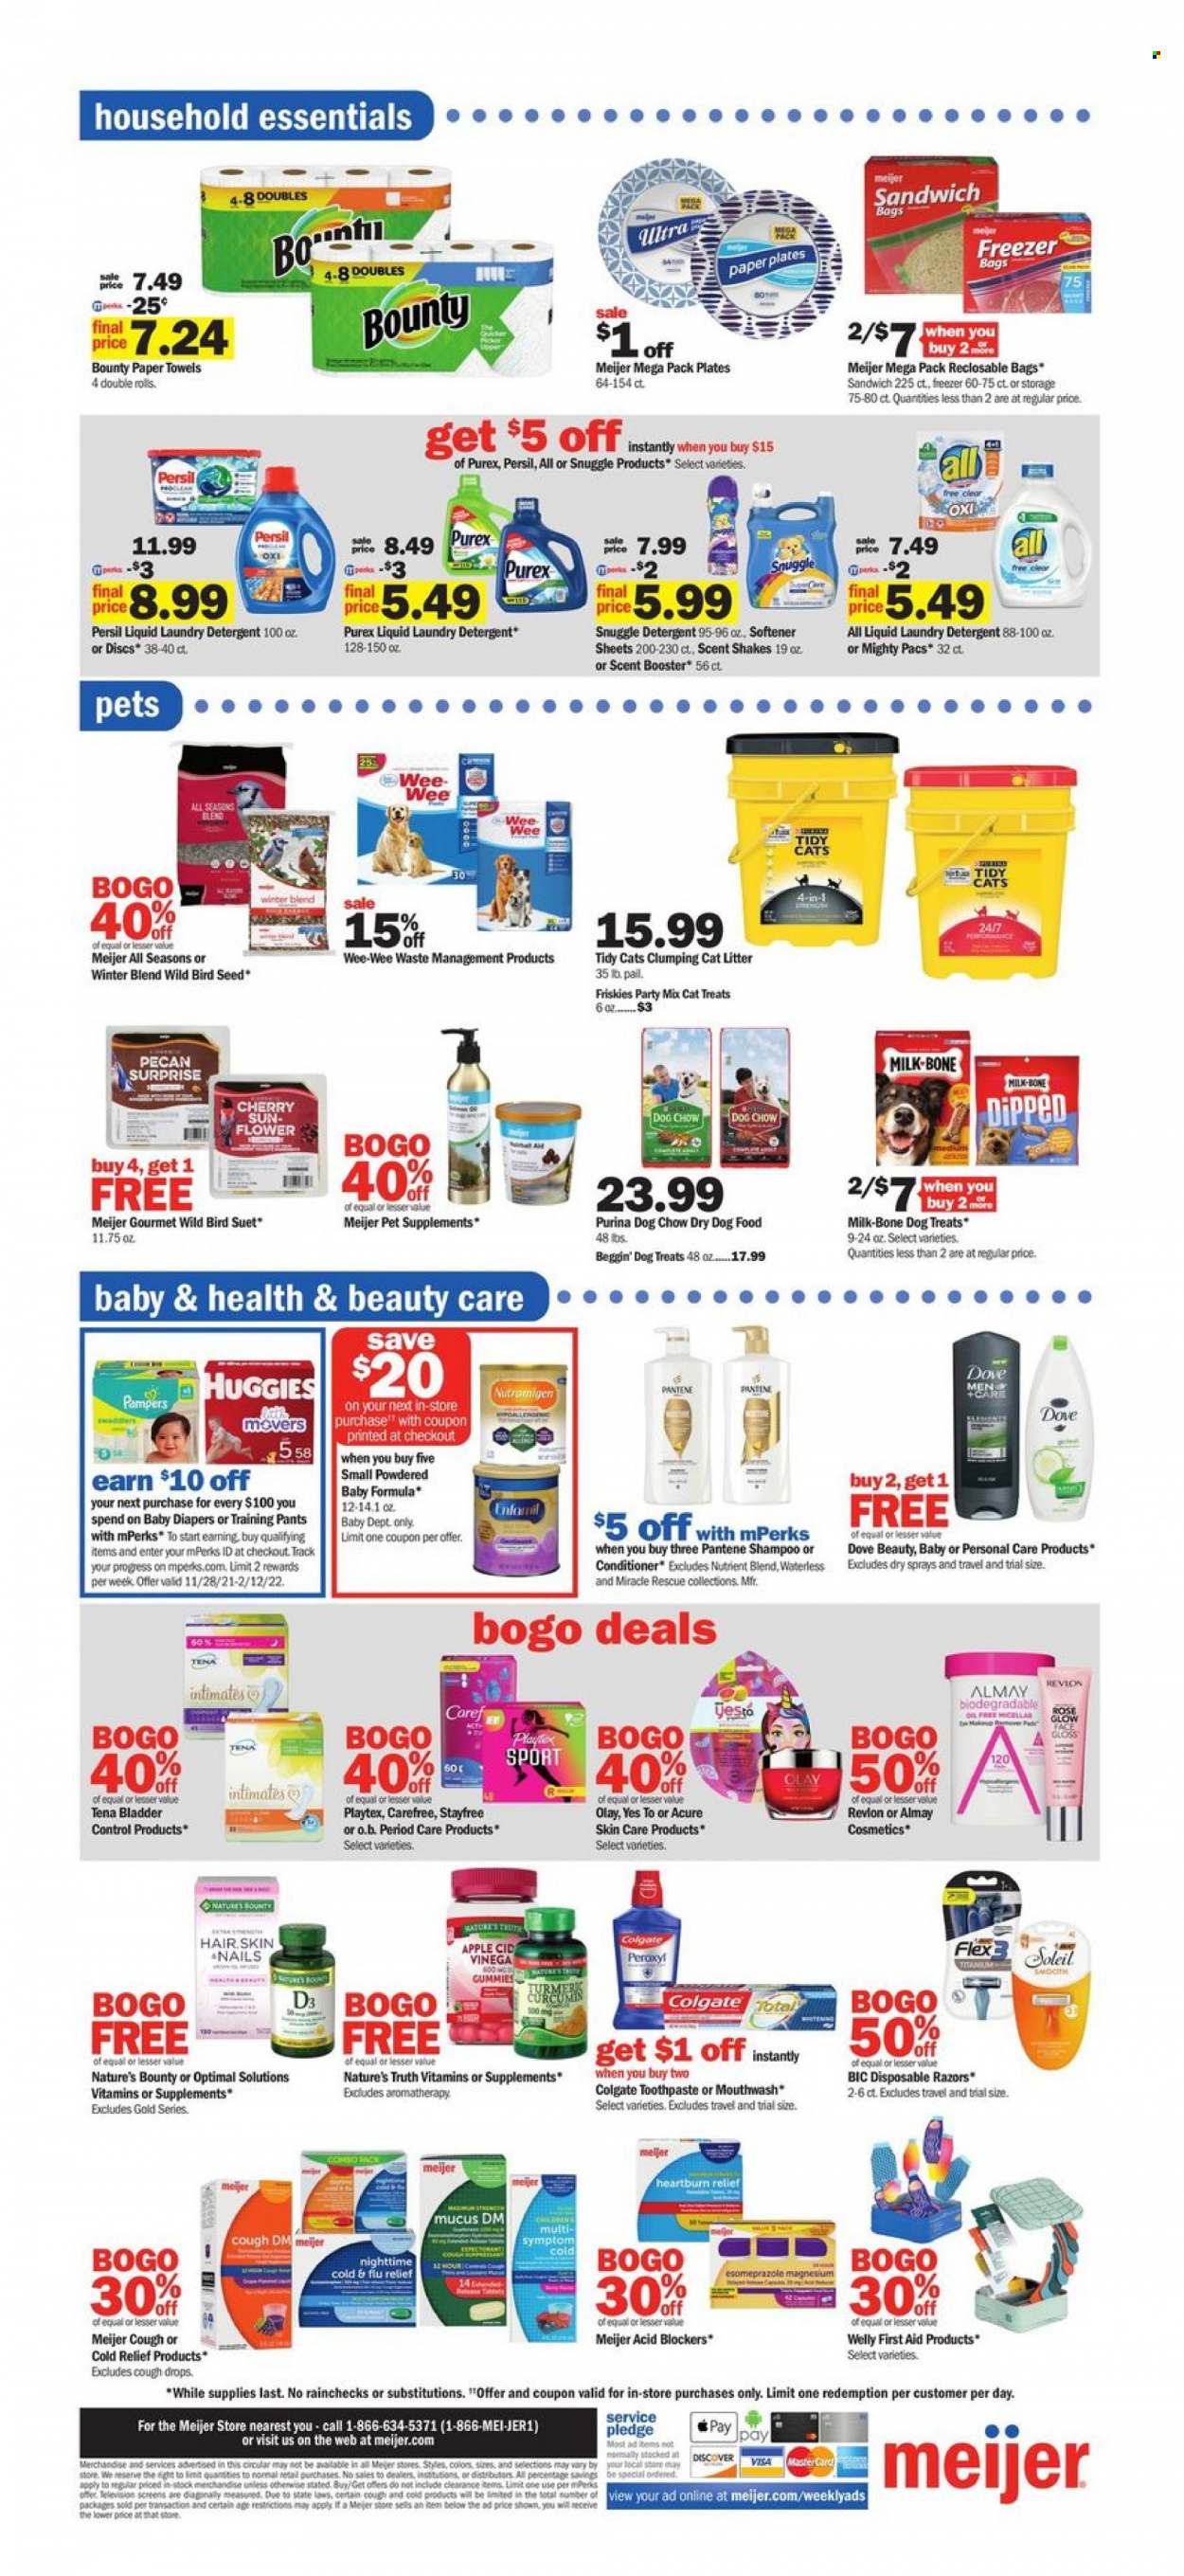 thumbnail - Meijer Flyer - 01/30/2022 - 02/05/2022 - Sales products - Ace, milk, shake, suet, wine, Huggies, Pampers, pants, nappies, baby pants, kitchen towels, paper towels, detergent, Pledge, Snuggle, Persil, fabric softener, laundry detergent, Purex, Dove, shampoo, Colgate, toothpaste, mouthwash, Stayfree, Playtex, Tena Lady, Carefree, Almay, Olay, conditioner, Revlon, Pantene, BIC, disposable razor, plate, freezer bag, cat litter, Wee-Wee, animal food, bird food, dog food, Dog Chow, Purina, dry dog food, Beggin', Friskies, Cold & Flu, magnesium, Nature's Bounty, Nature's Truth, vitamin D3, cough drops. Page 13.